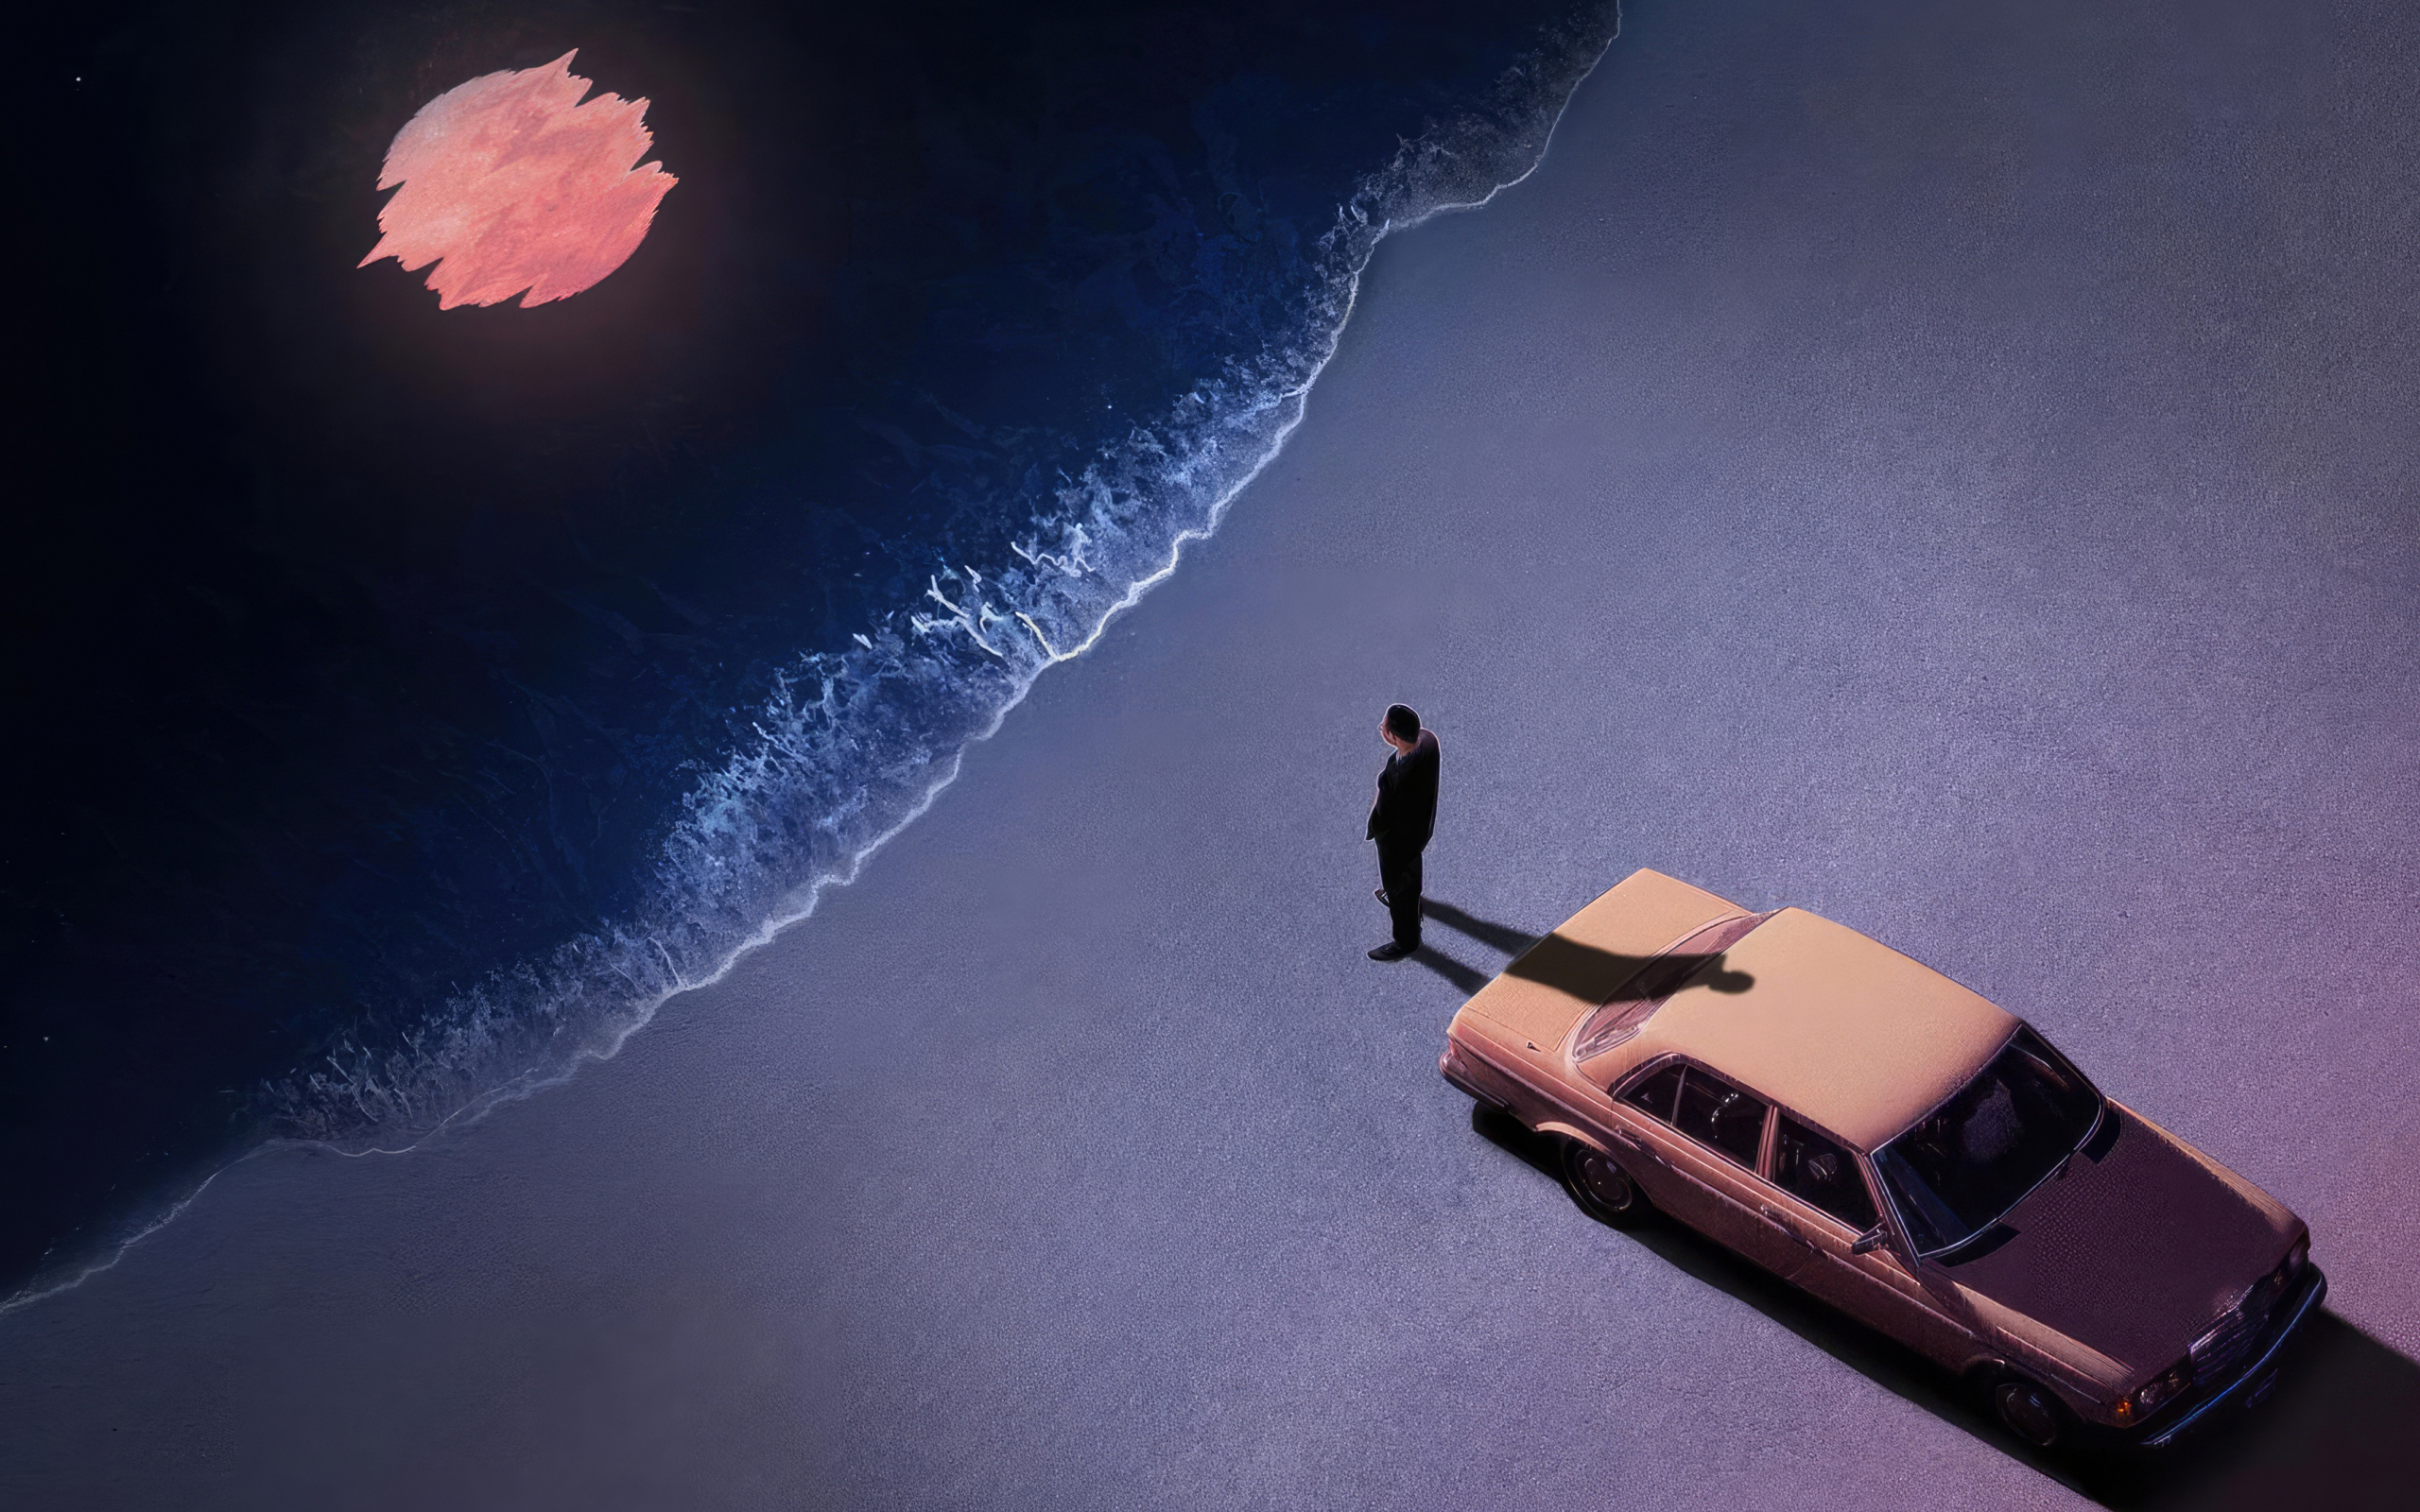 Lonely at night at the beach, car and man, art , 2560x1600 wallpaper